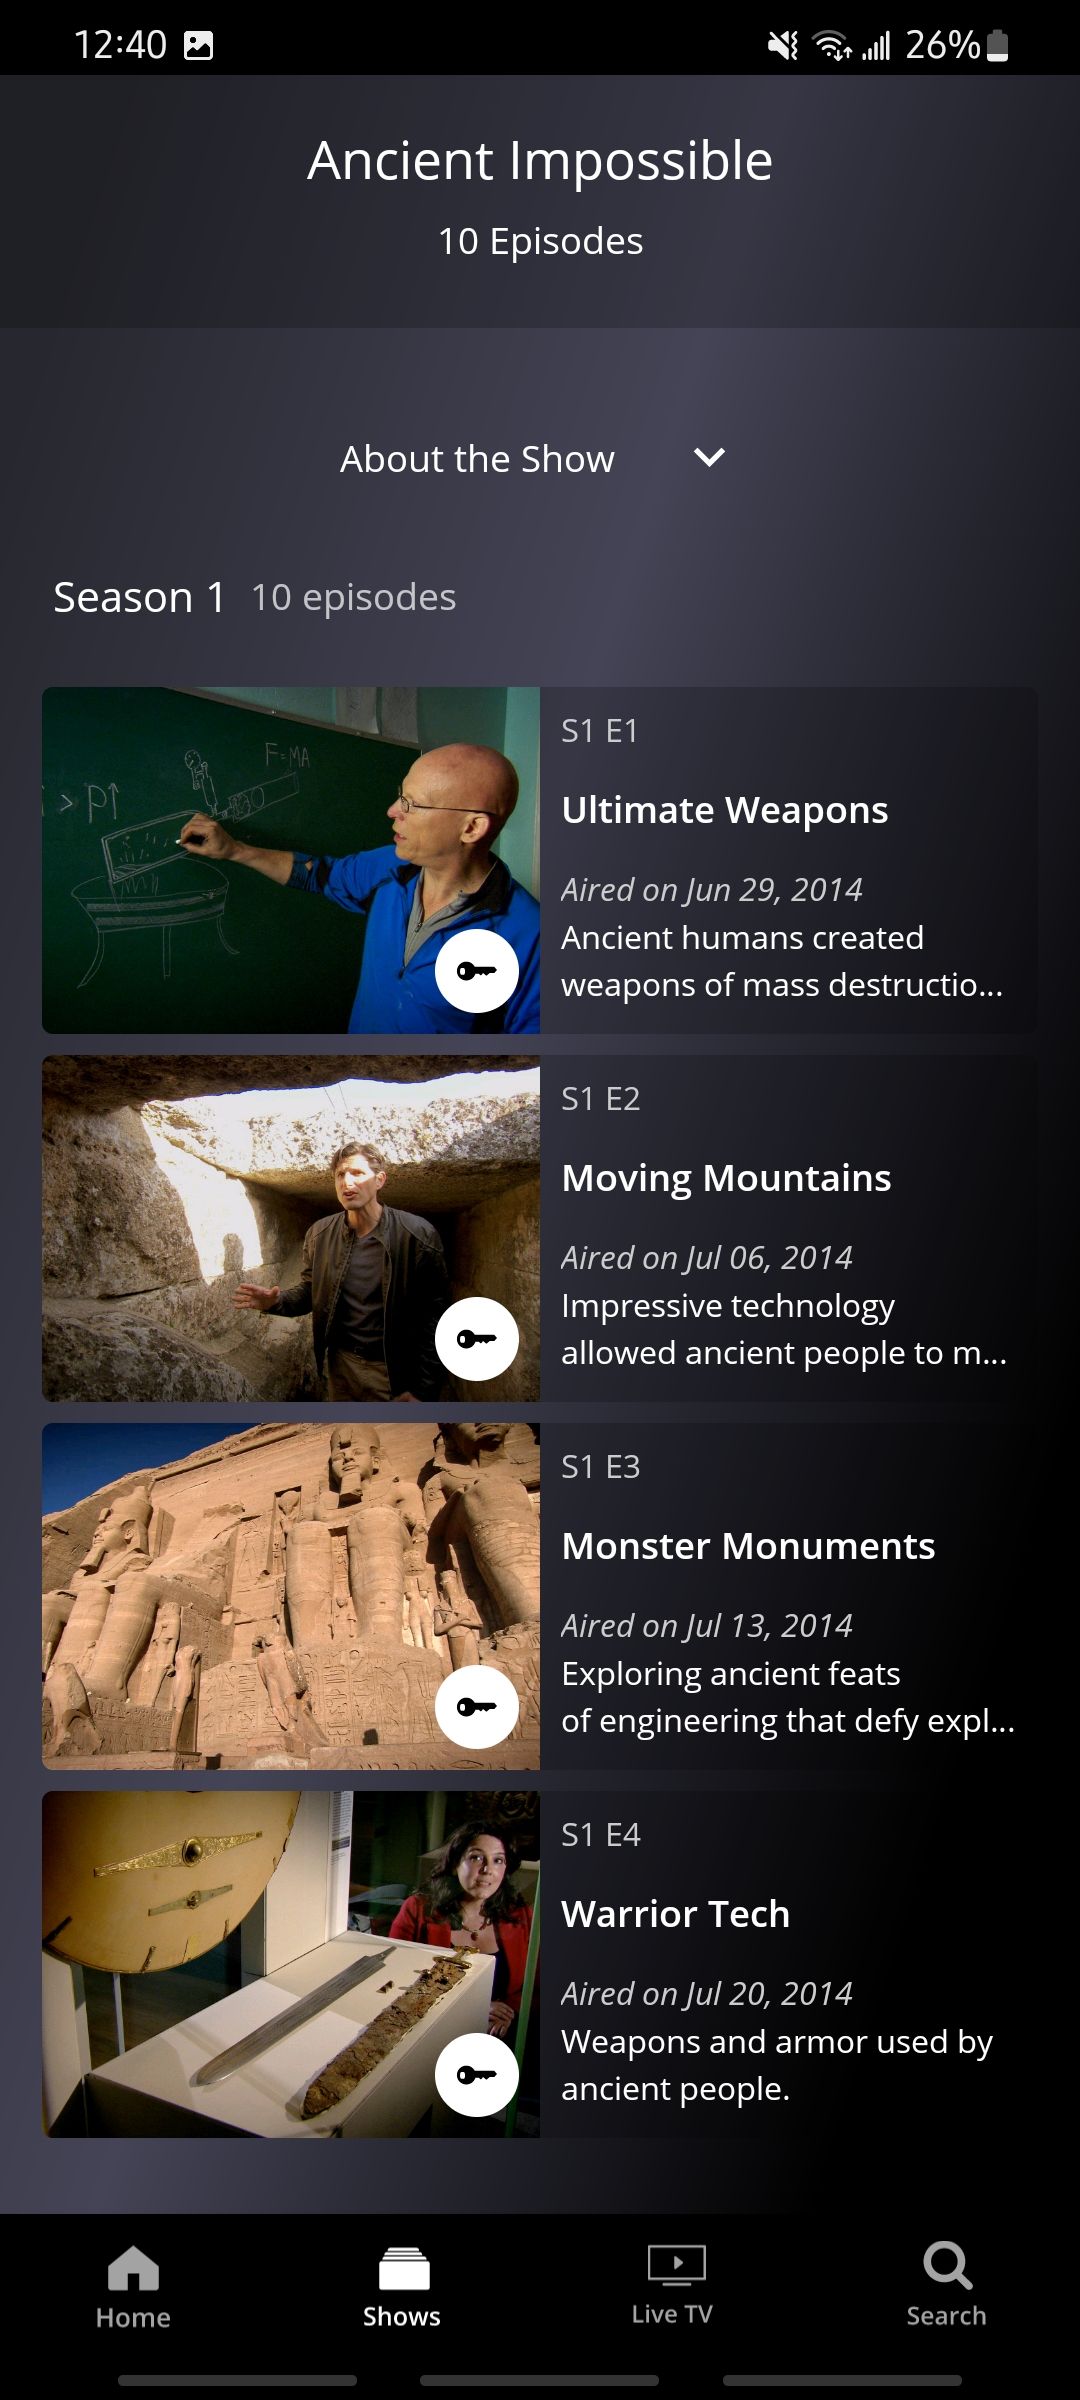 showing first four episodes of ancient impossible show on history channel app